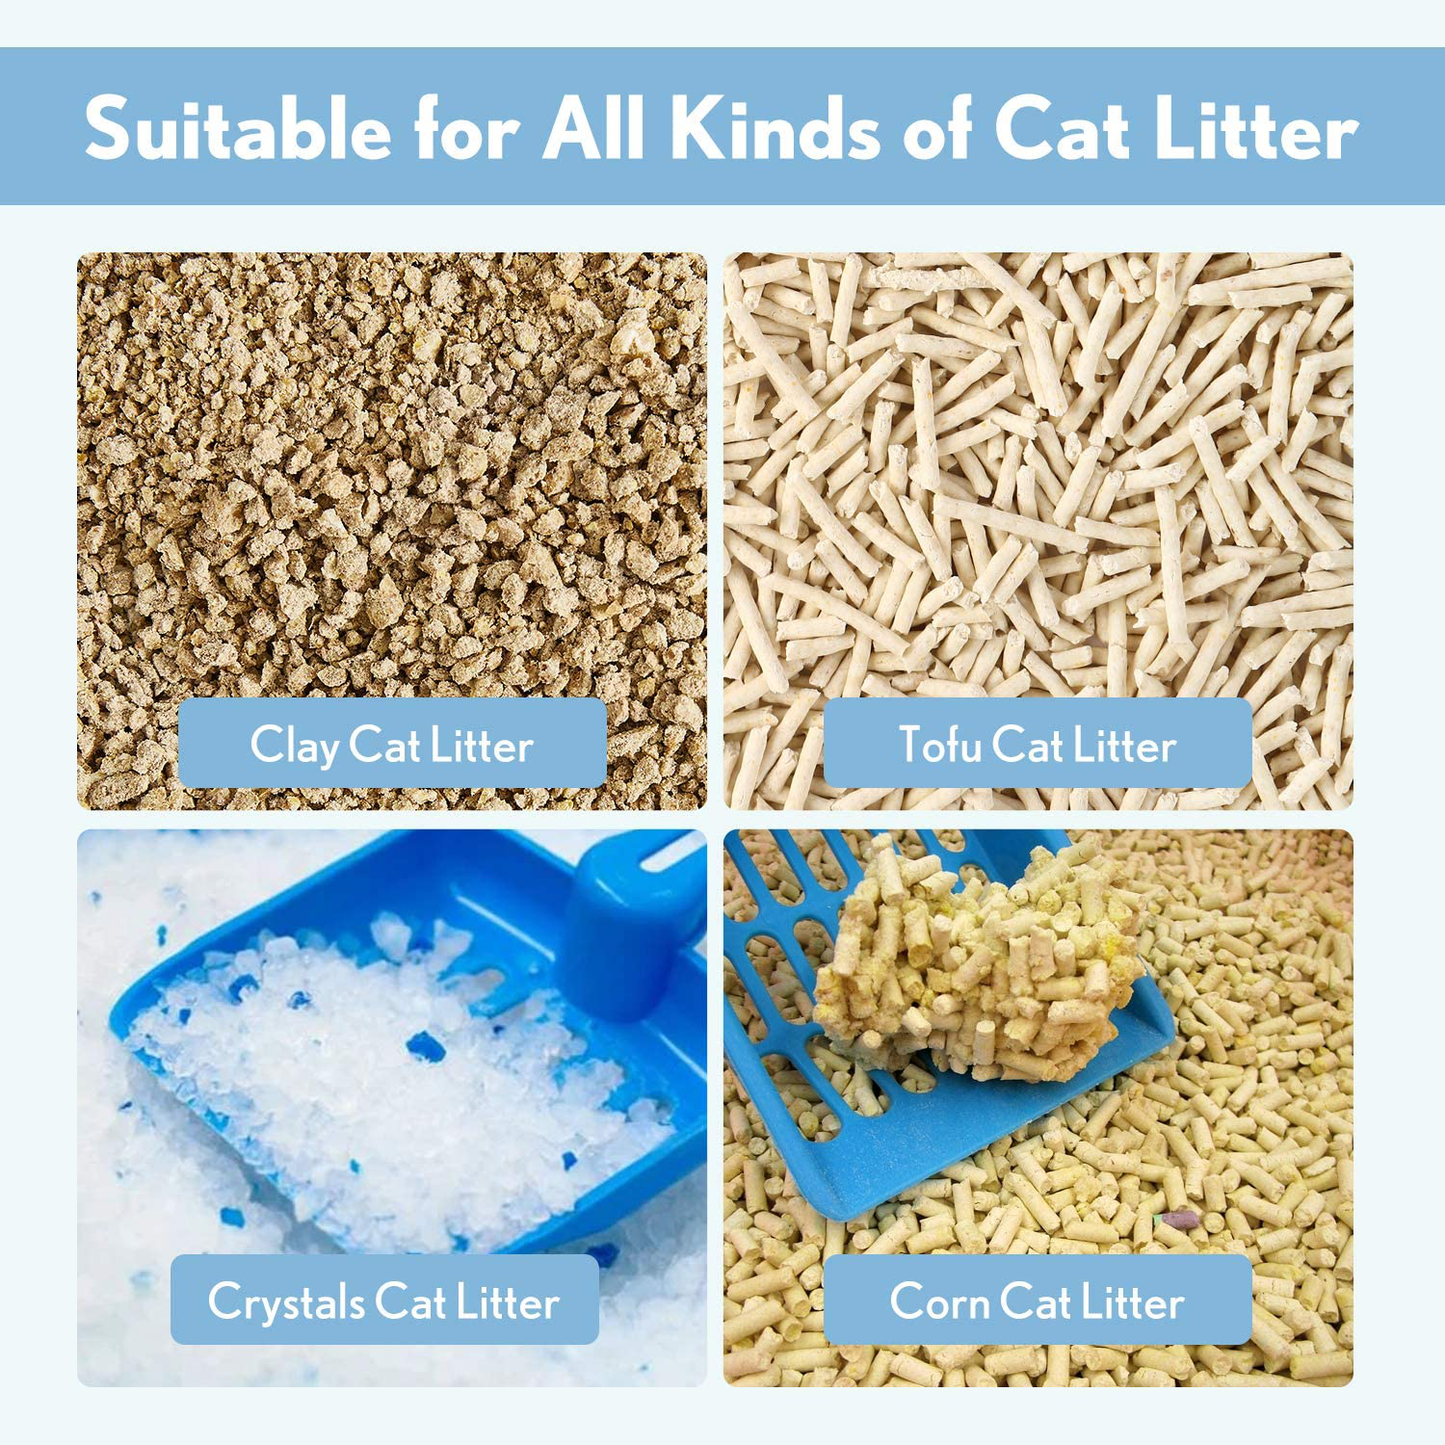 No Scent Cat Litter Deodorizer Litter Box Odor Eliminator Natural Deordizer Kitten Litter Smell Control Safe Litter Deoderizer for Kitty Solid Adsorbents of Minerals&Activated Charcoal 10 Oz Bottle Animals & Pet Supplies > Pet Supplies > Cat Supplies > Cat Litter Box Liners PETNF   